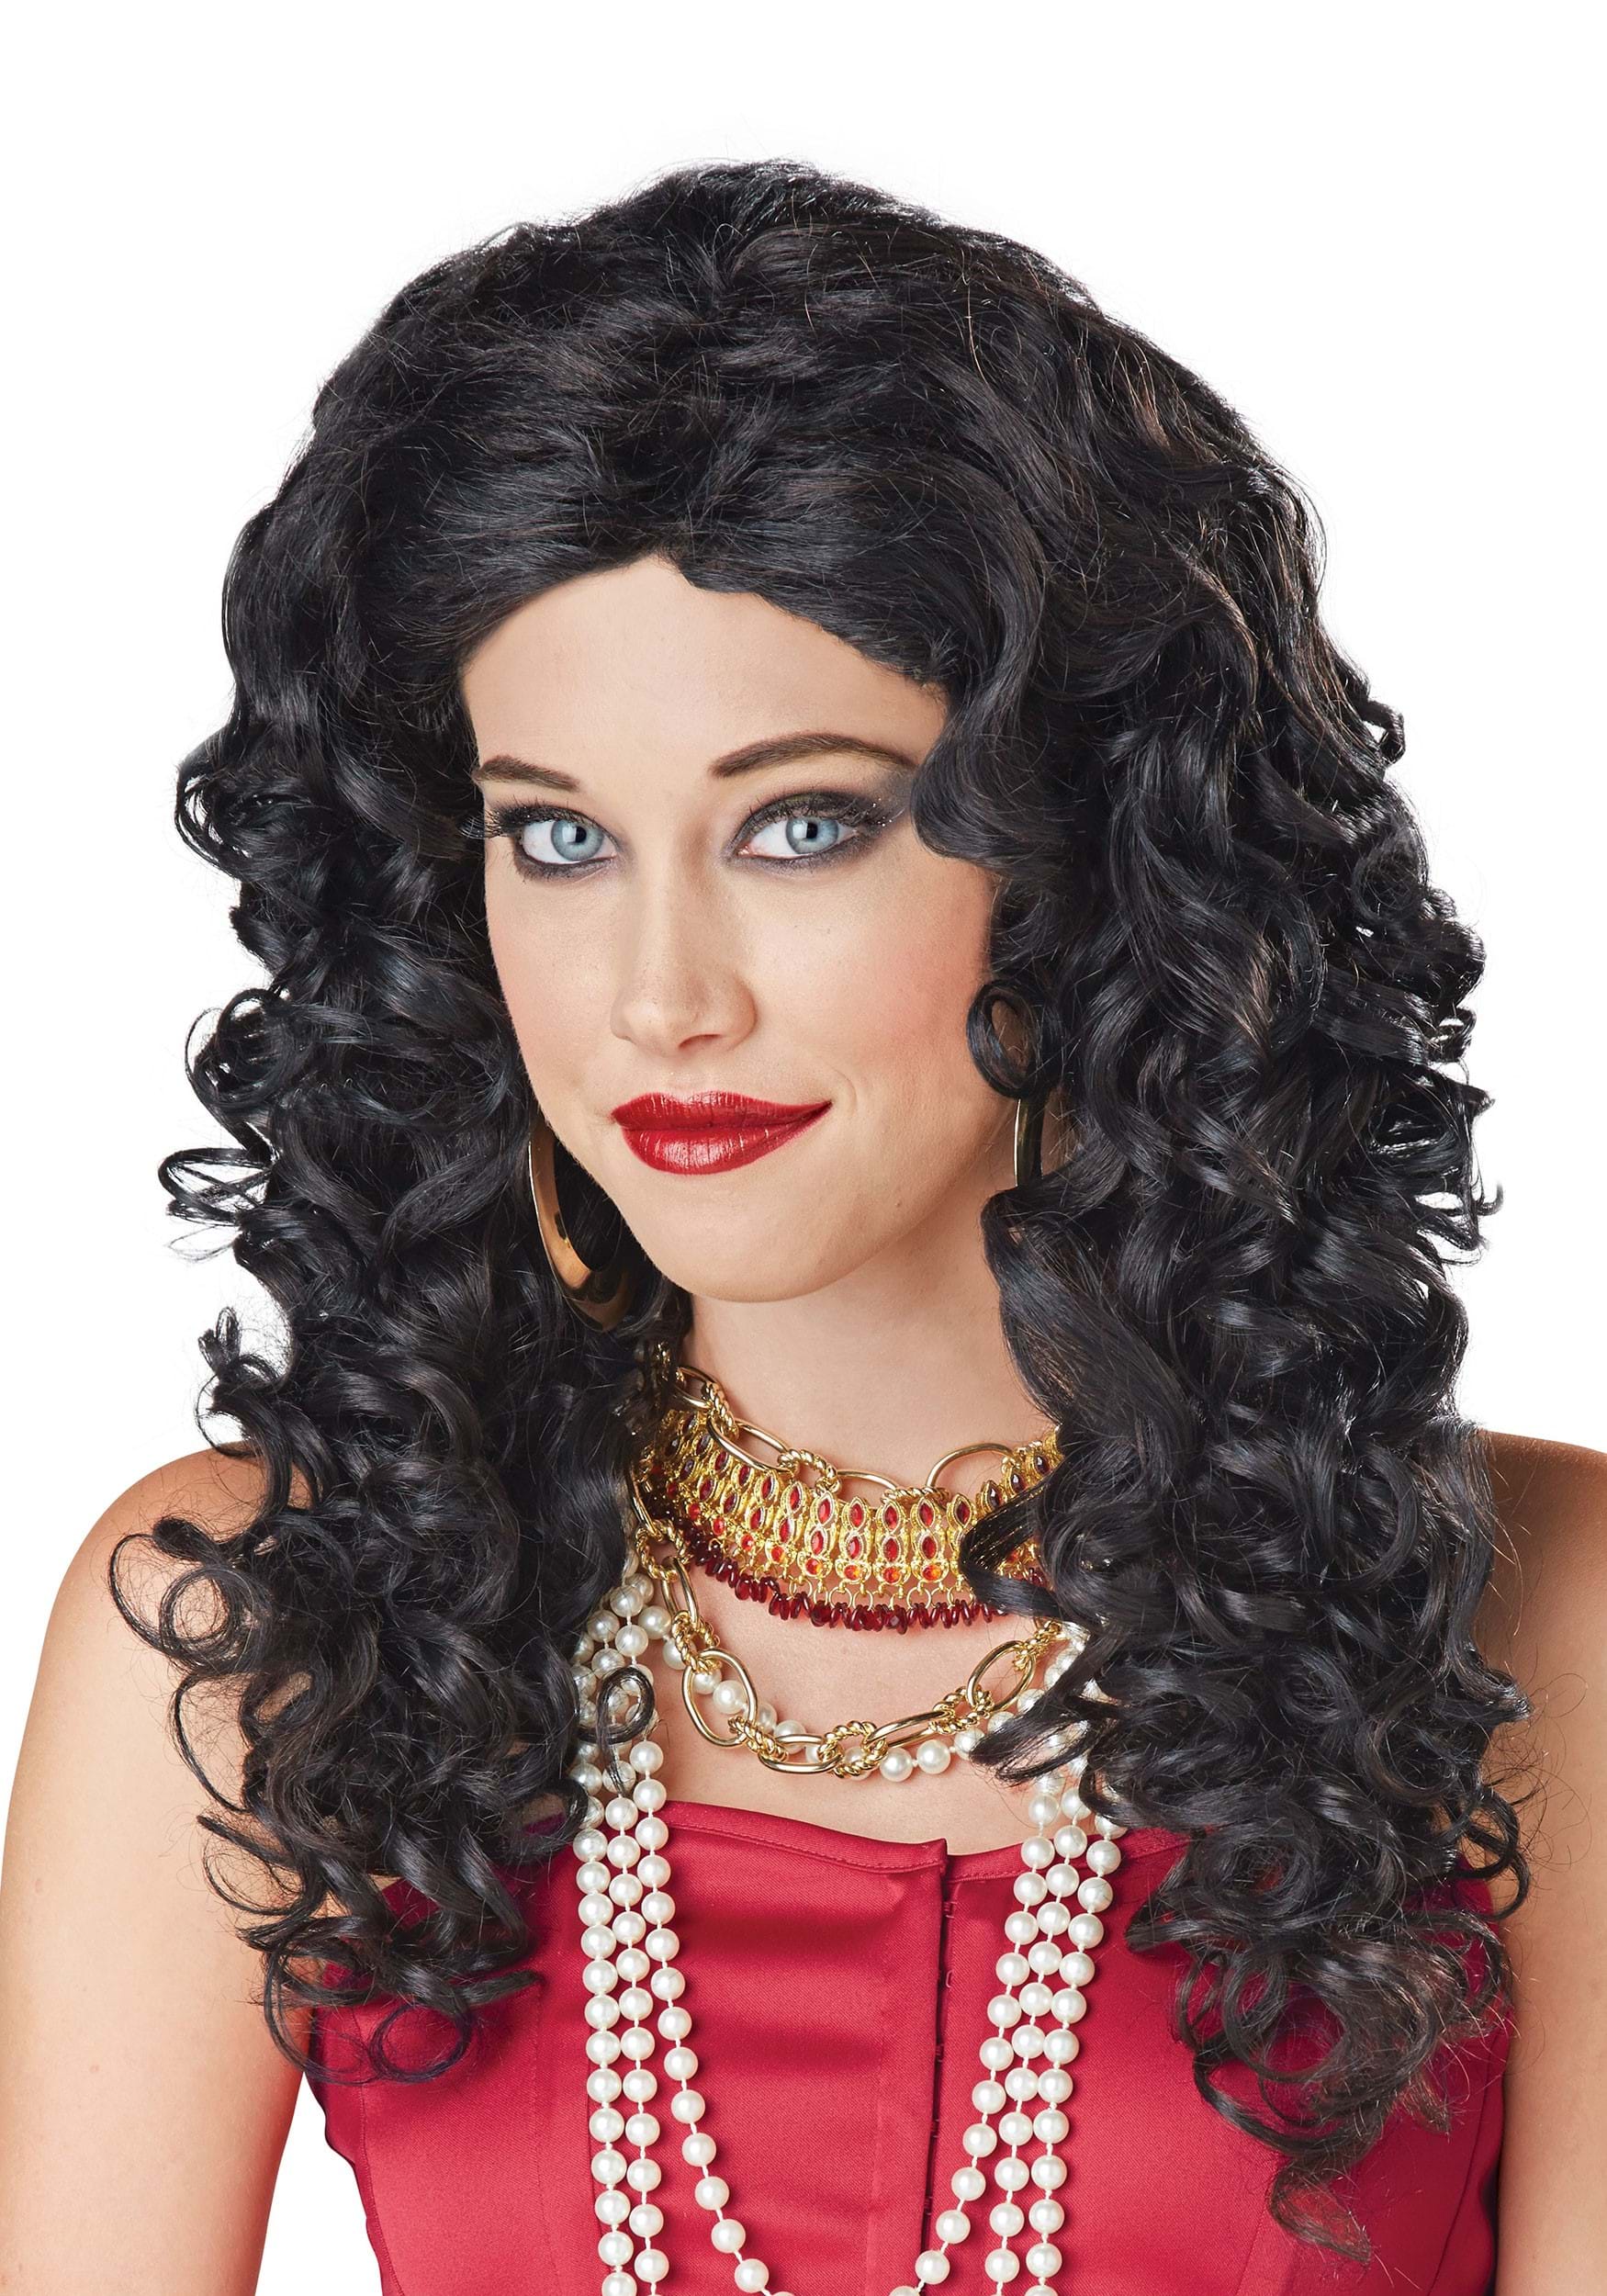 https://images.halloweencostumes.com/products/79873/1-1/womens-captain-hook-wig.jpg